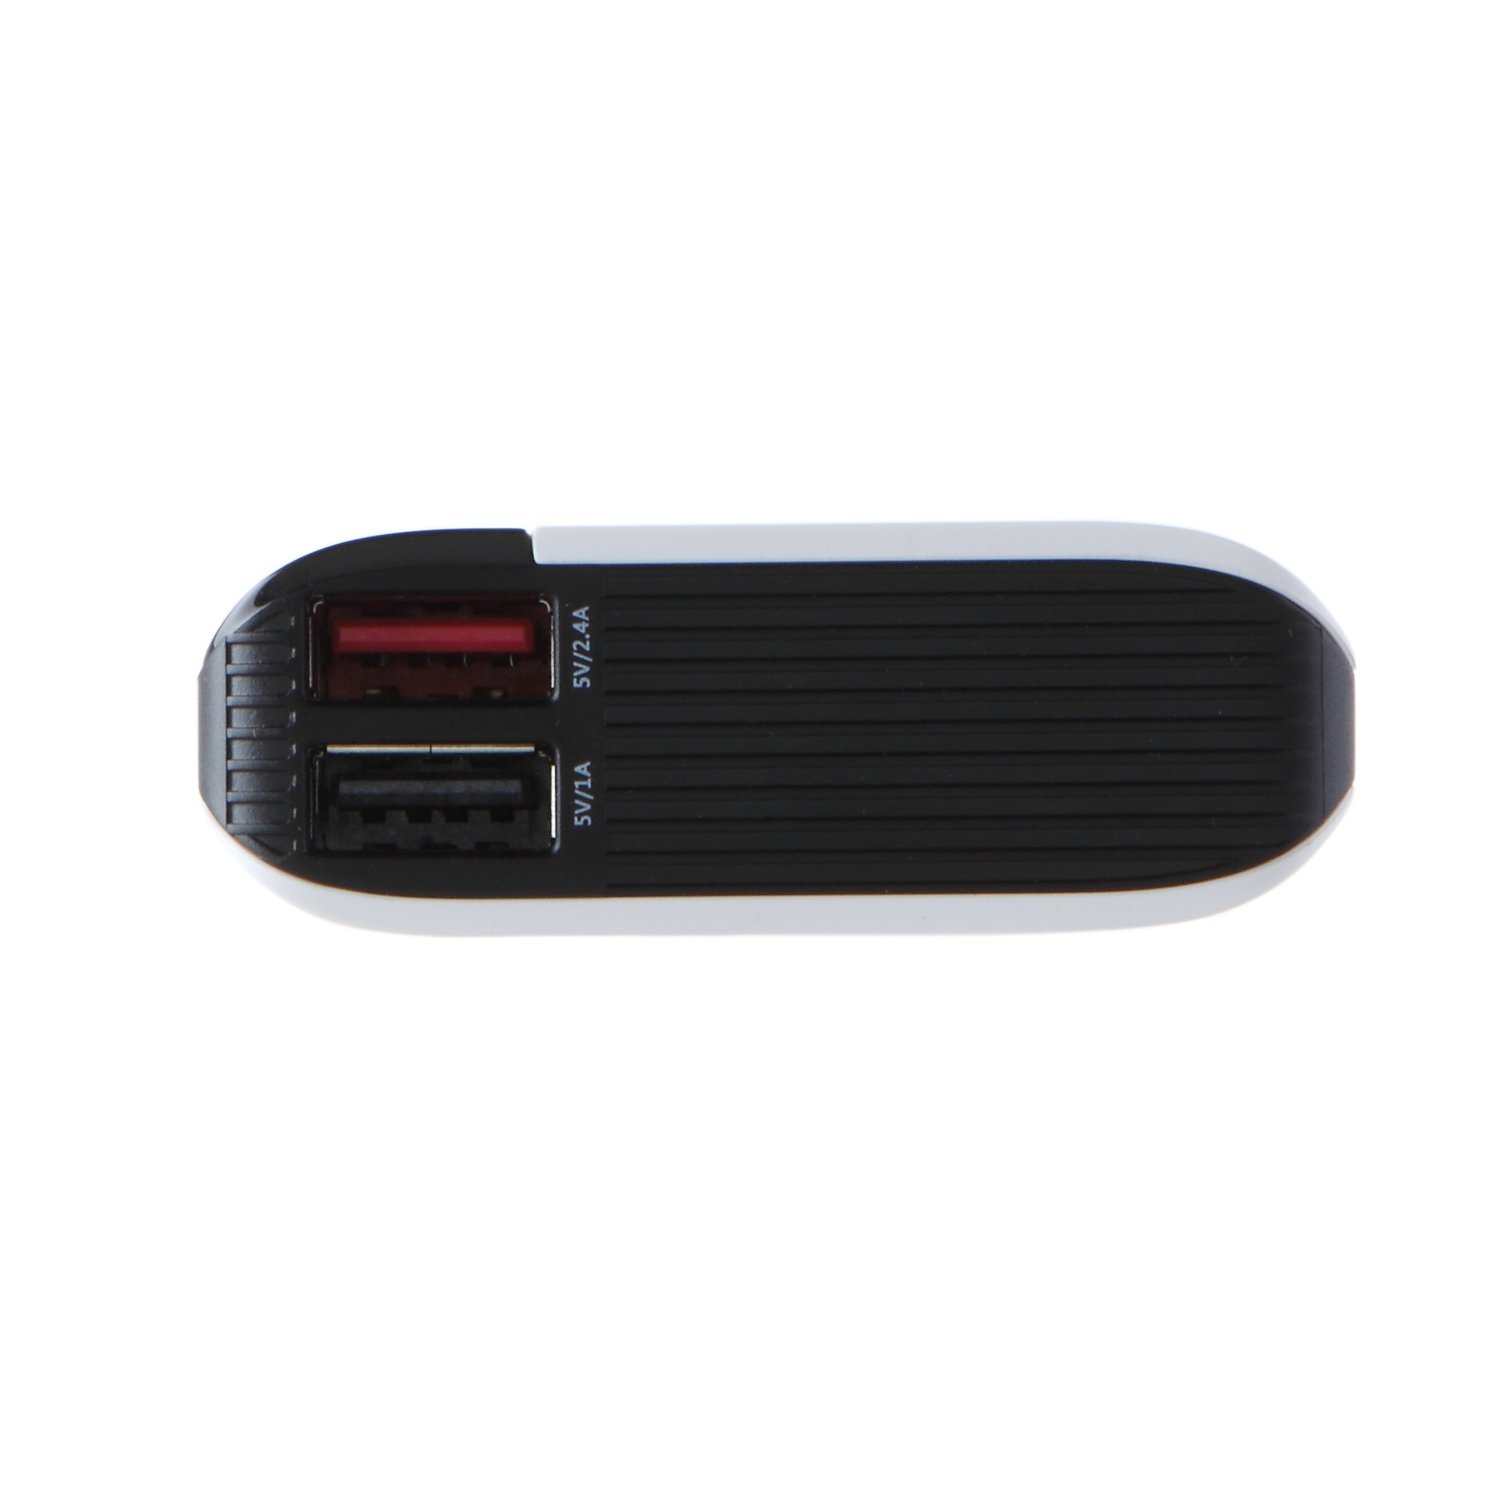 10,400mAh Power Bank with IC for Auto Detection, Lithium-ion, 5V/2